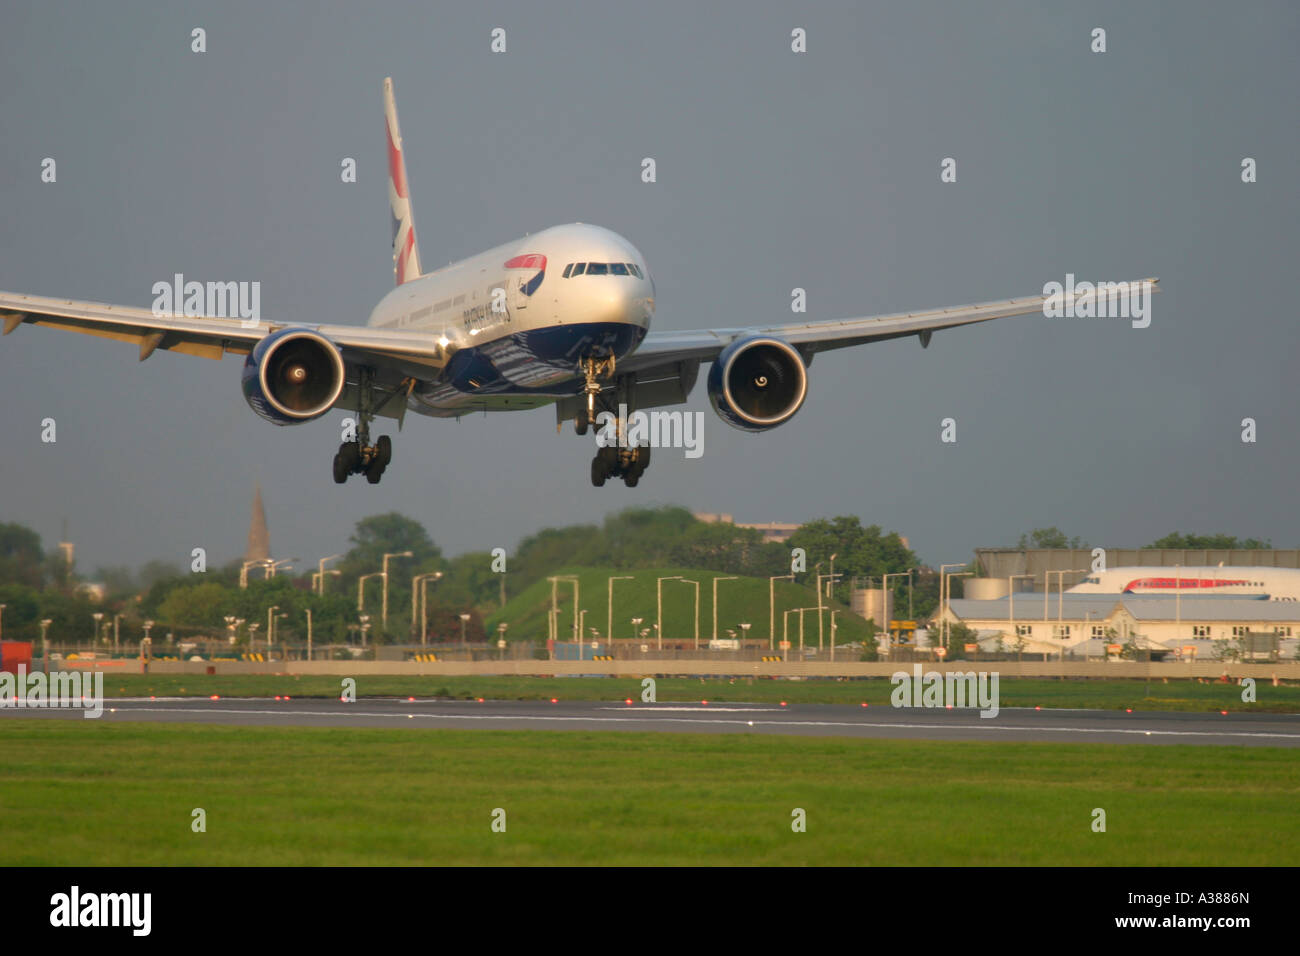 British Airways Boeing 777 about to land at London Heathrow Airport England UK Stock Photo